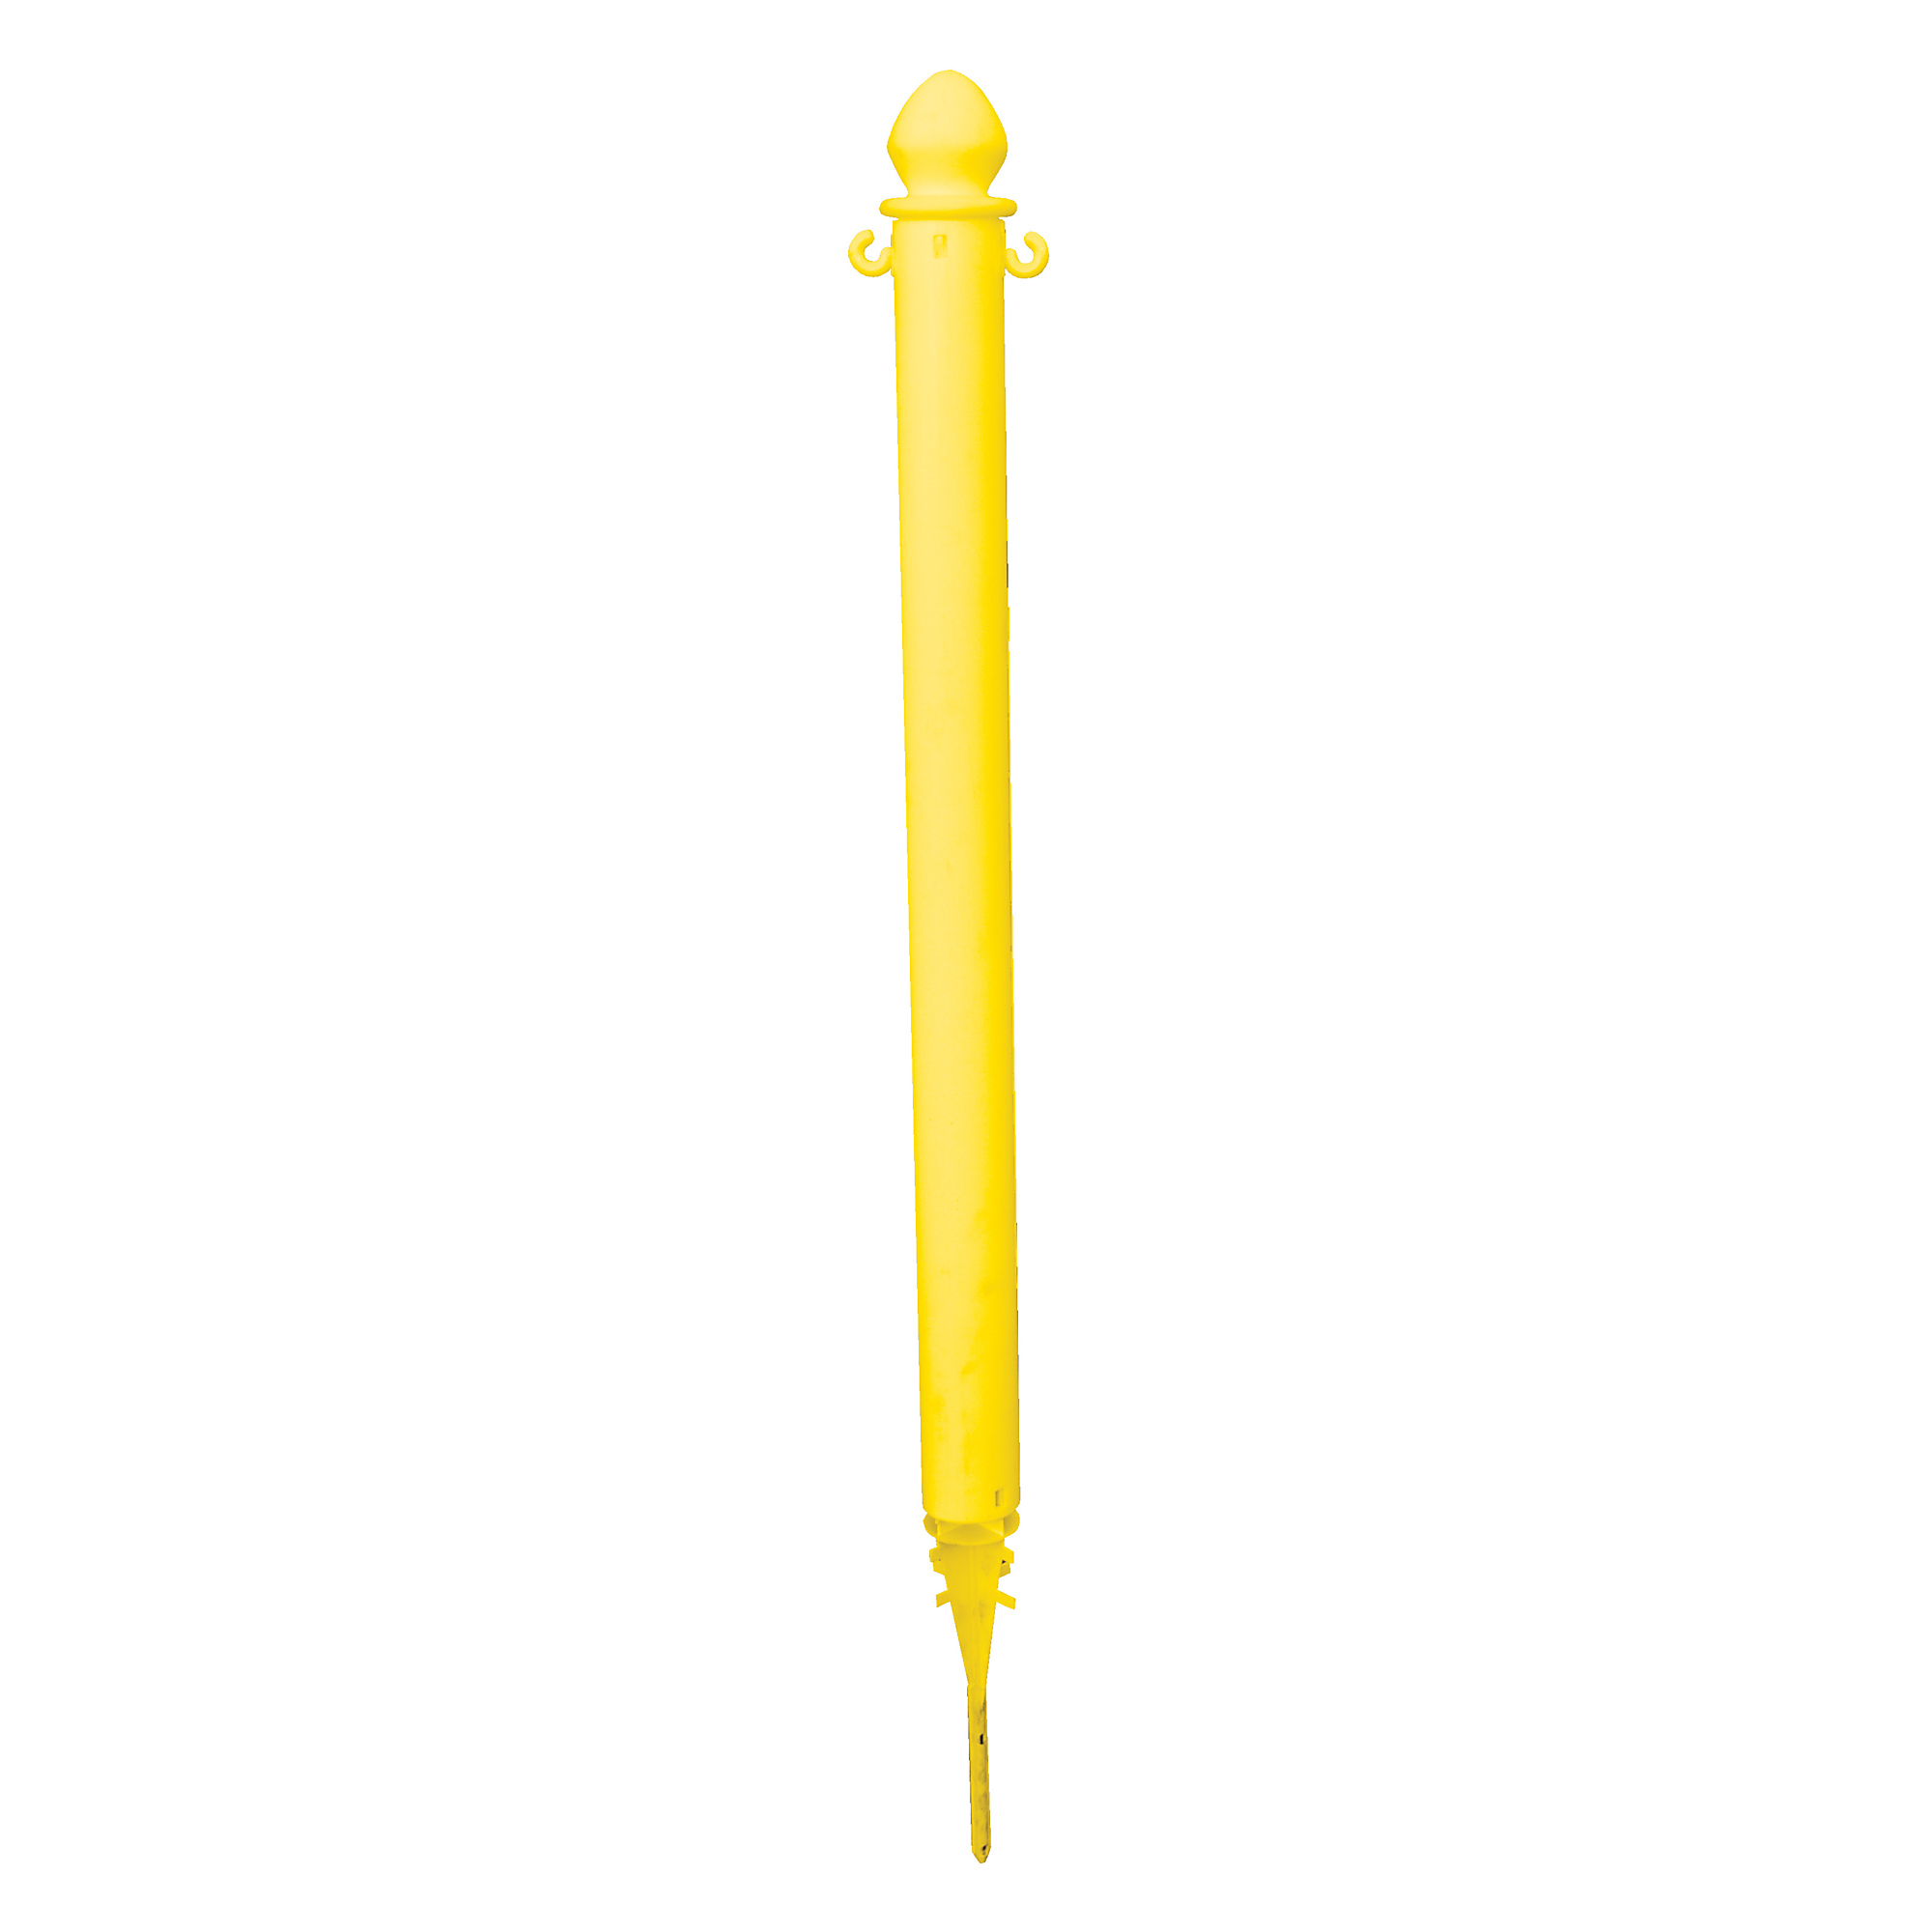 Vestil, 4Pack plastic barricade ground stake, Color Yellow, Max. Width 2.5 in, Material Plastic, Model PCB-Y-G